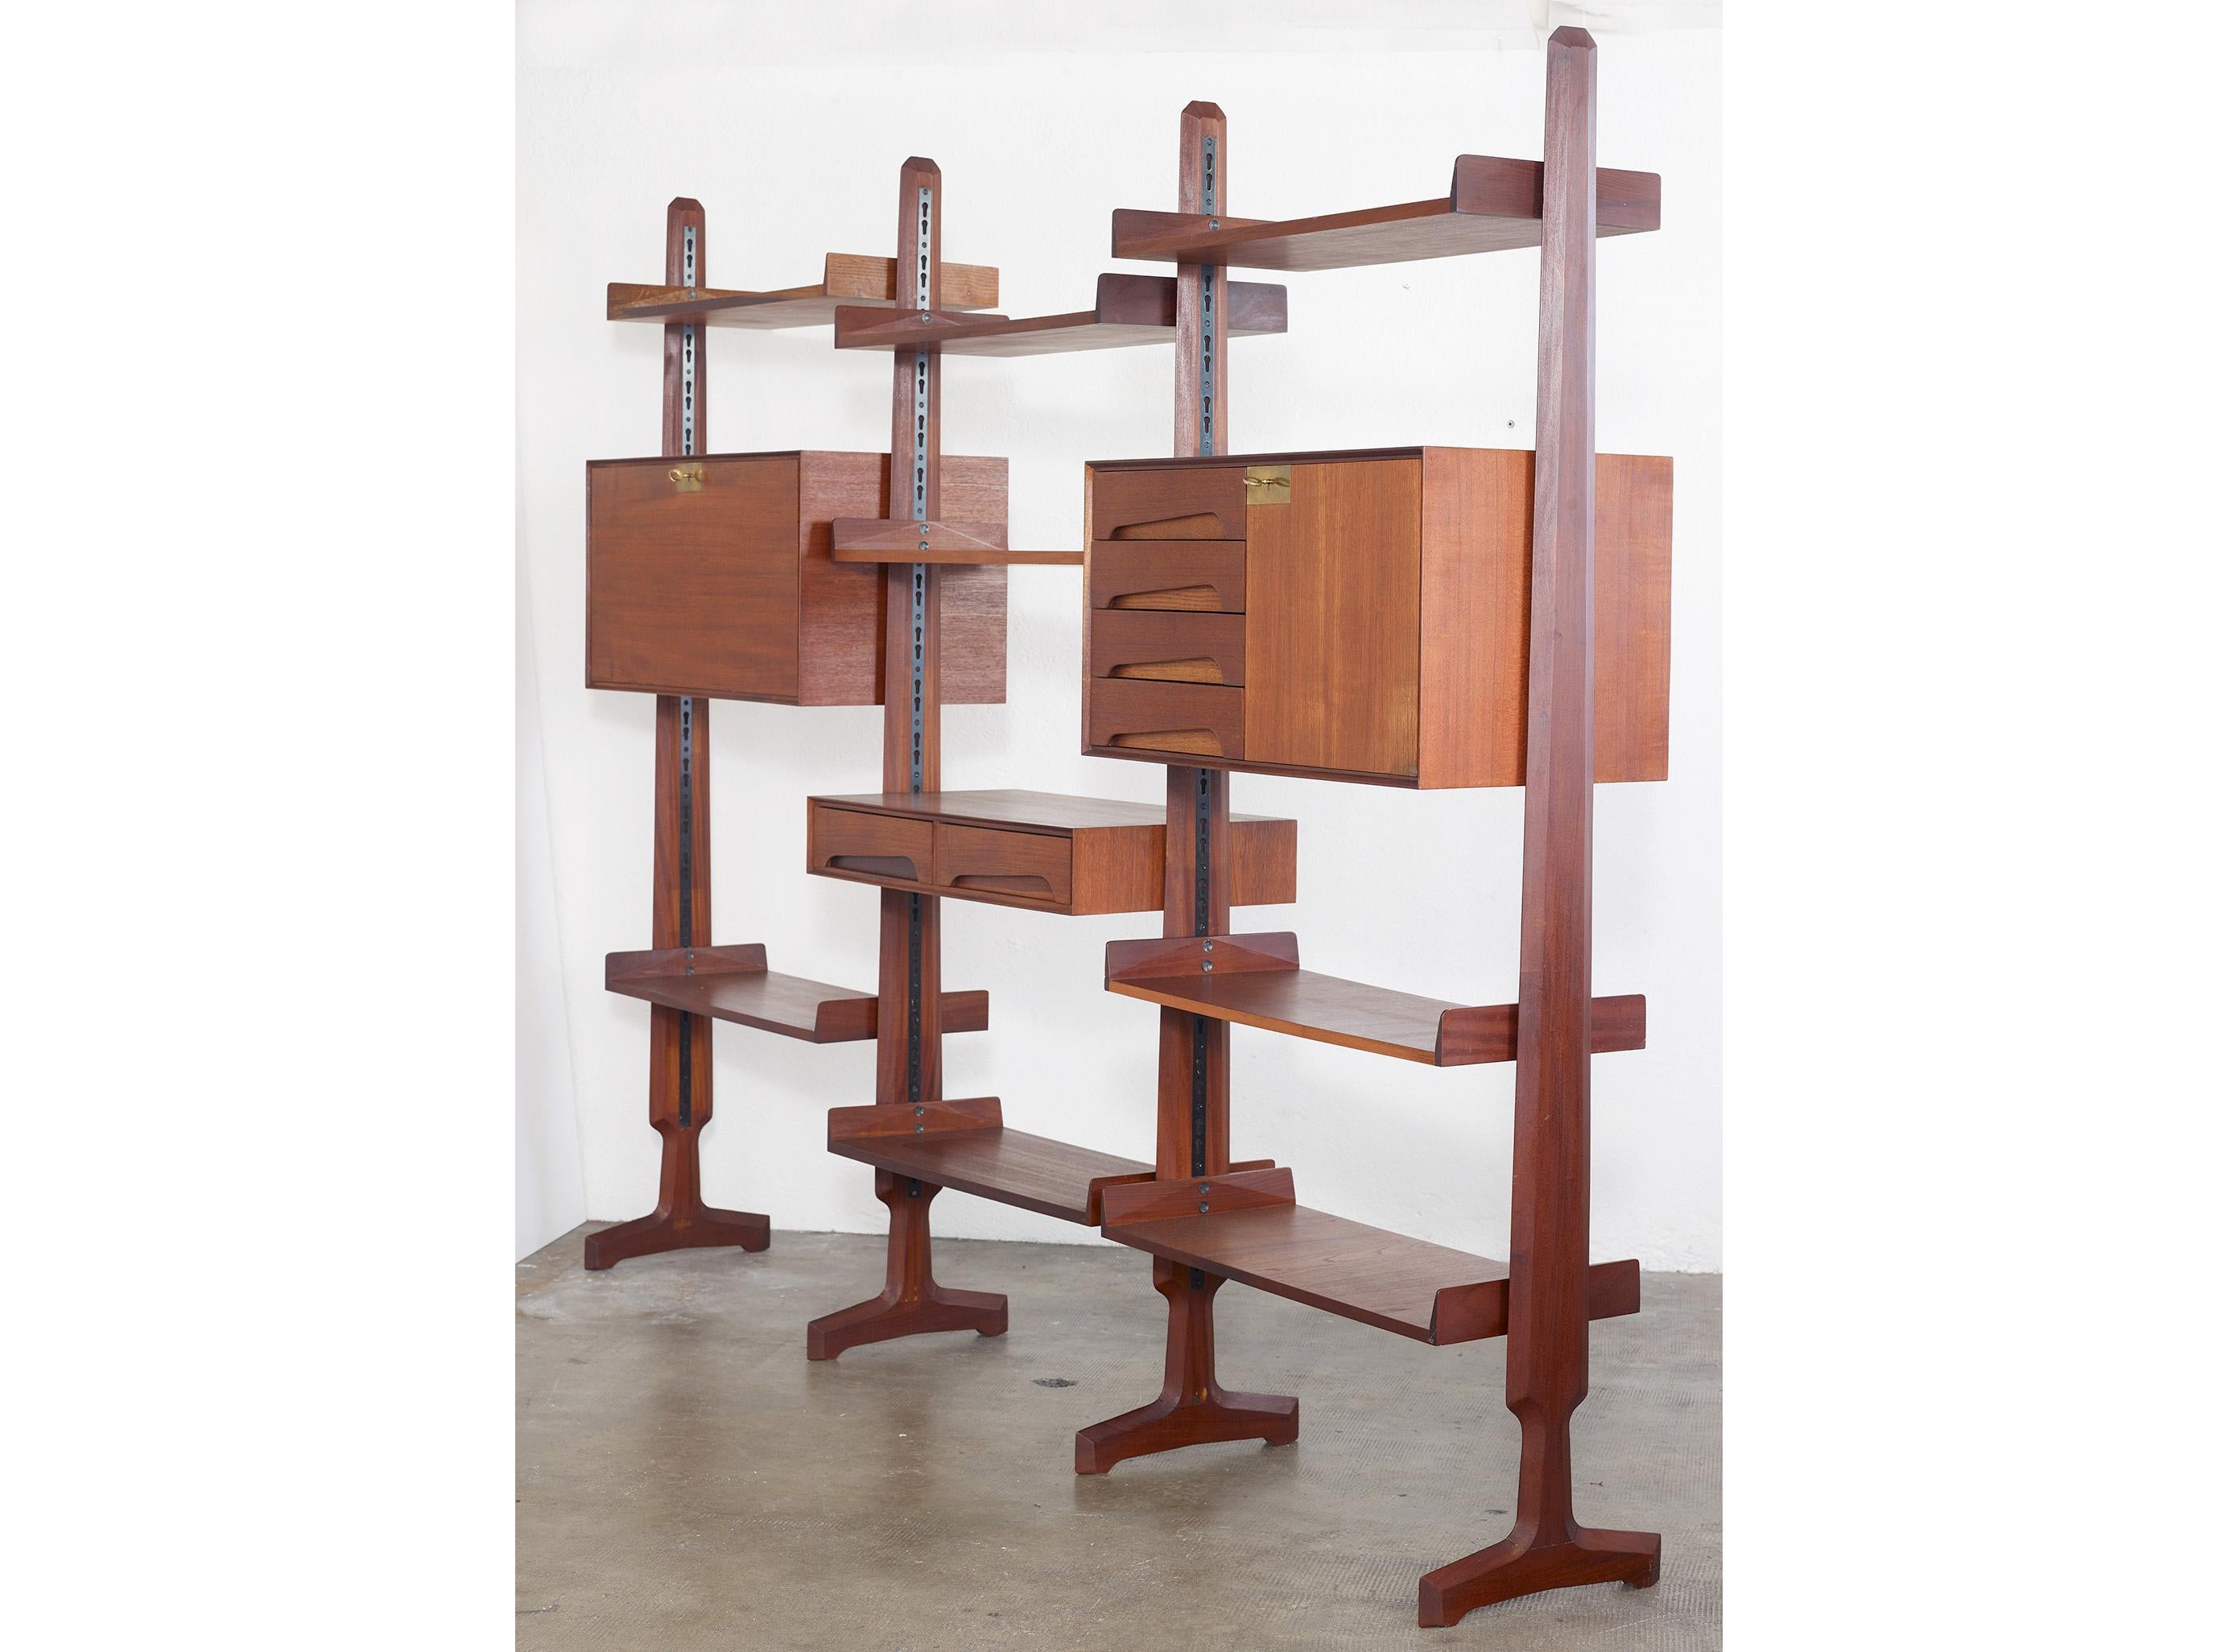 Very elegant teak modular library or bookcase designed by Vittorio Dassi and Edmondo Palutari for Dassi Italy end of the 1950s.

The freestanding modular bookcase has two cabinets, a drawer unit and eight shelves which can all be positioned